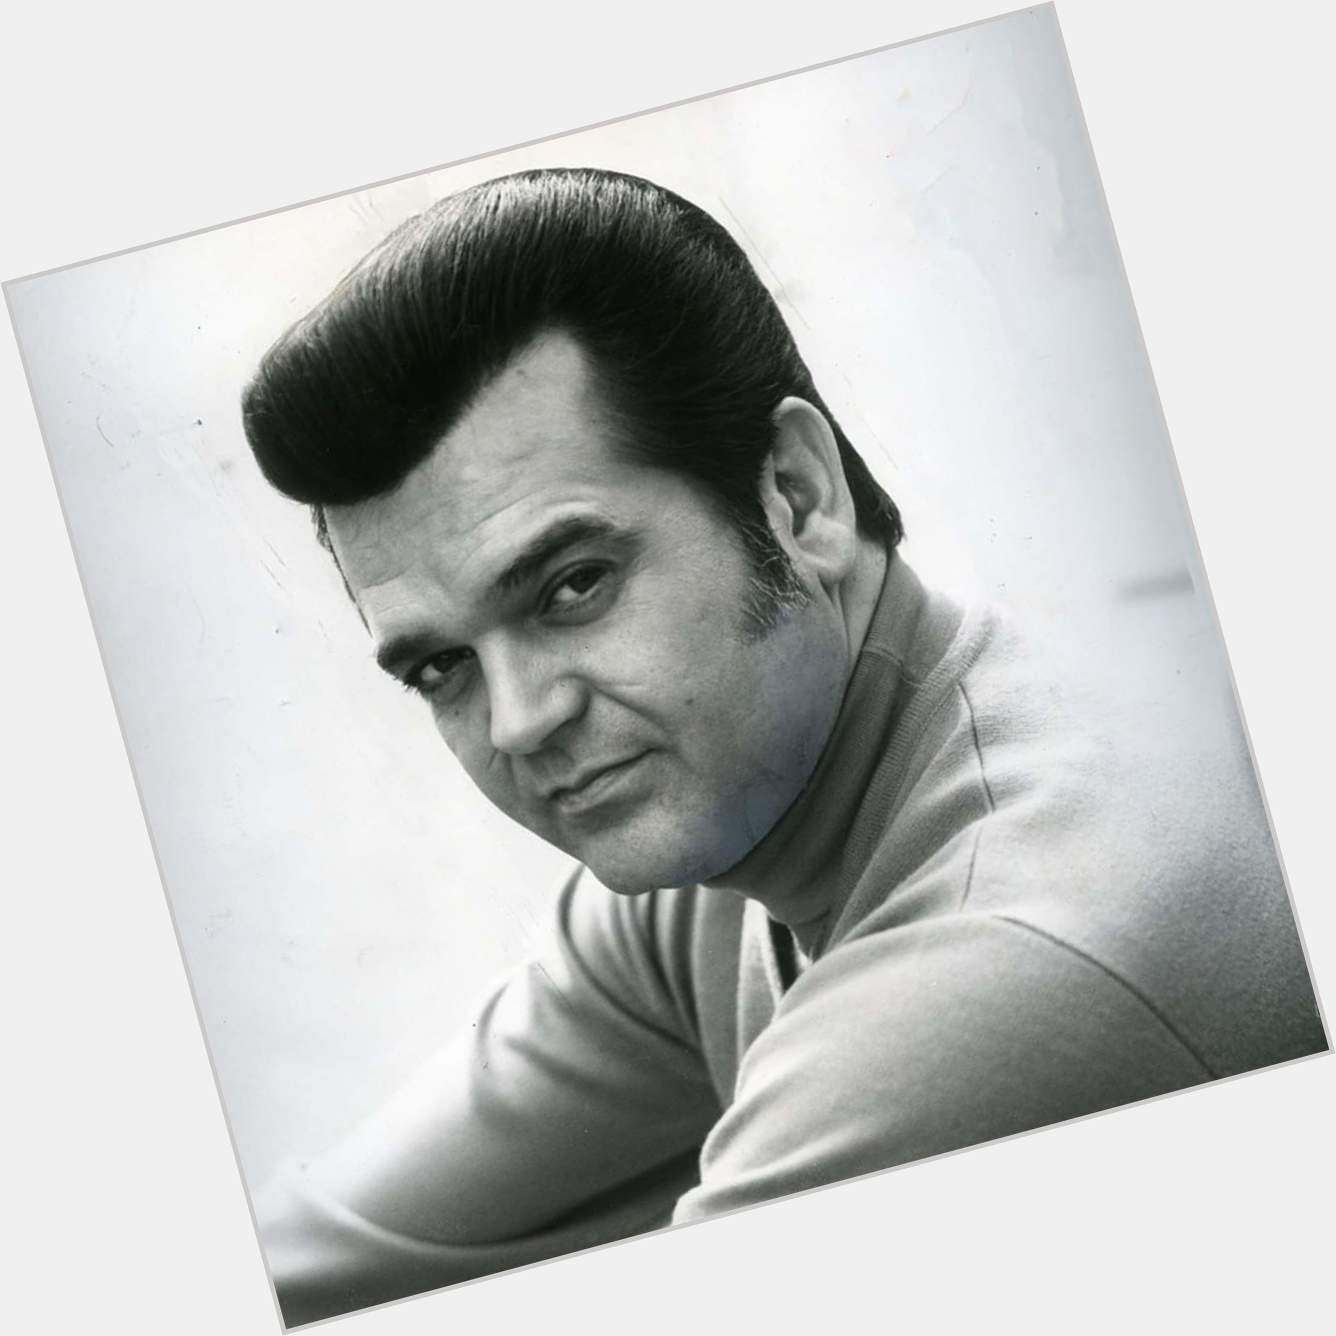 Happy Birthday to Conway Twitty! Born on this day in 1933, he would have been 87 years old today. 